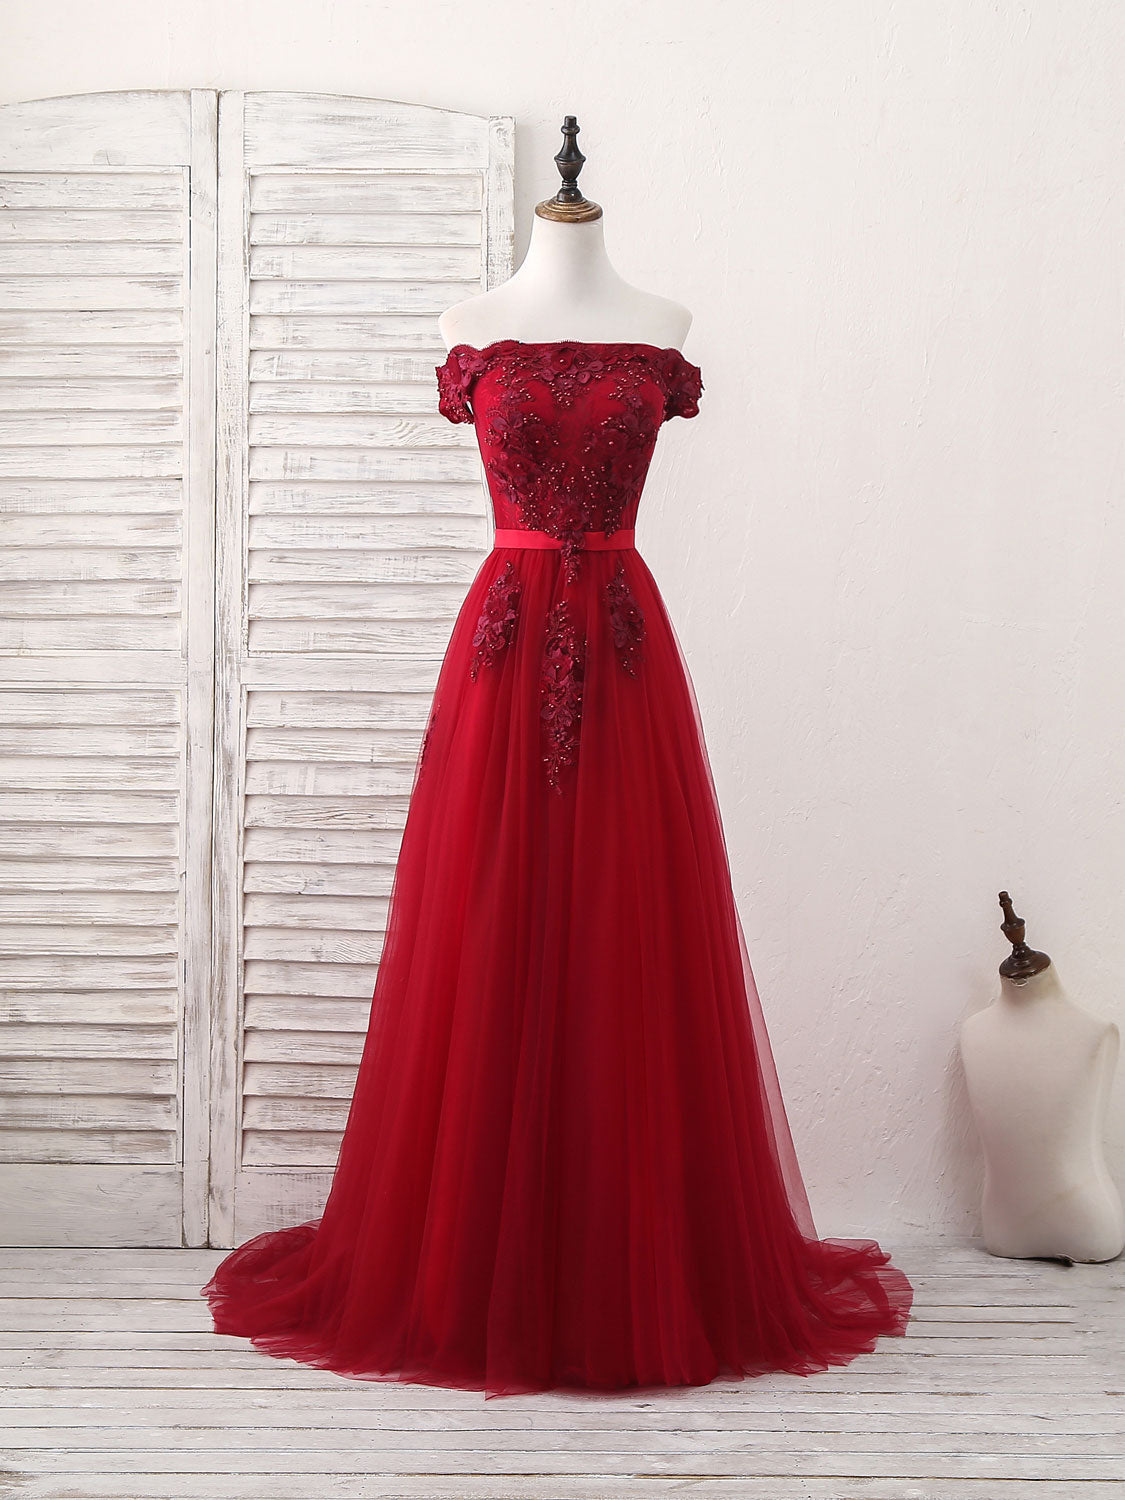 Burgundy Off Shoulder Tulle Lace Applique Long Corset Prom Dress, Evening Dress outfit, Prom Dress Long Sleeve Ball Gown